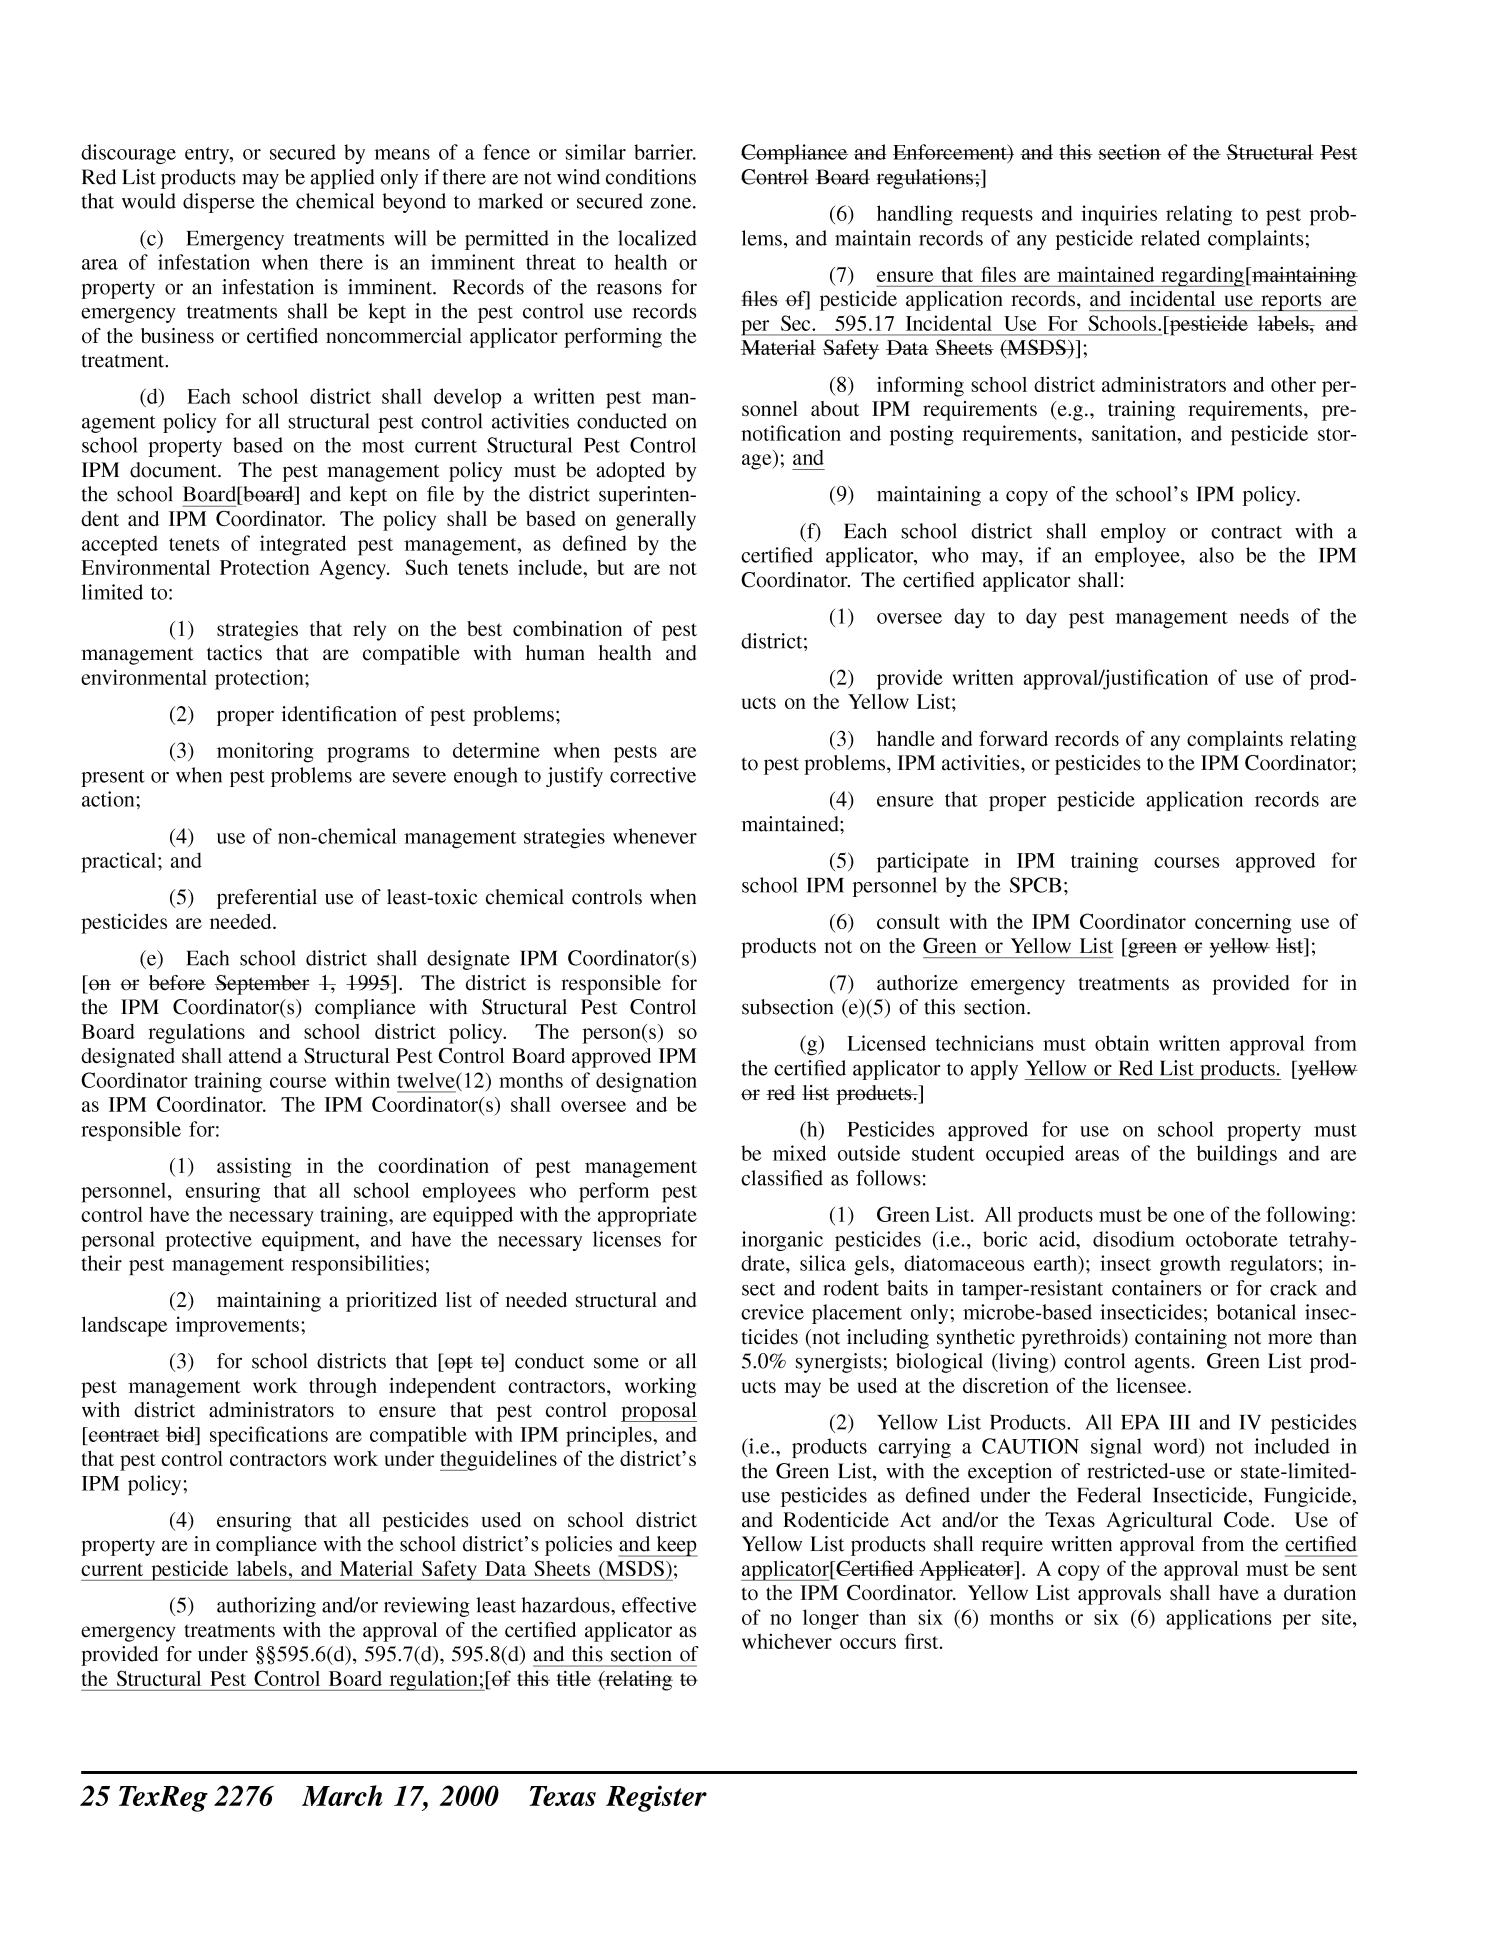 Texas Register, Volume 25, Number 11, Pages 2223-2484, March 17, 2000
                                                
                                                    2276
                                                